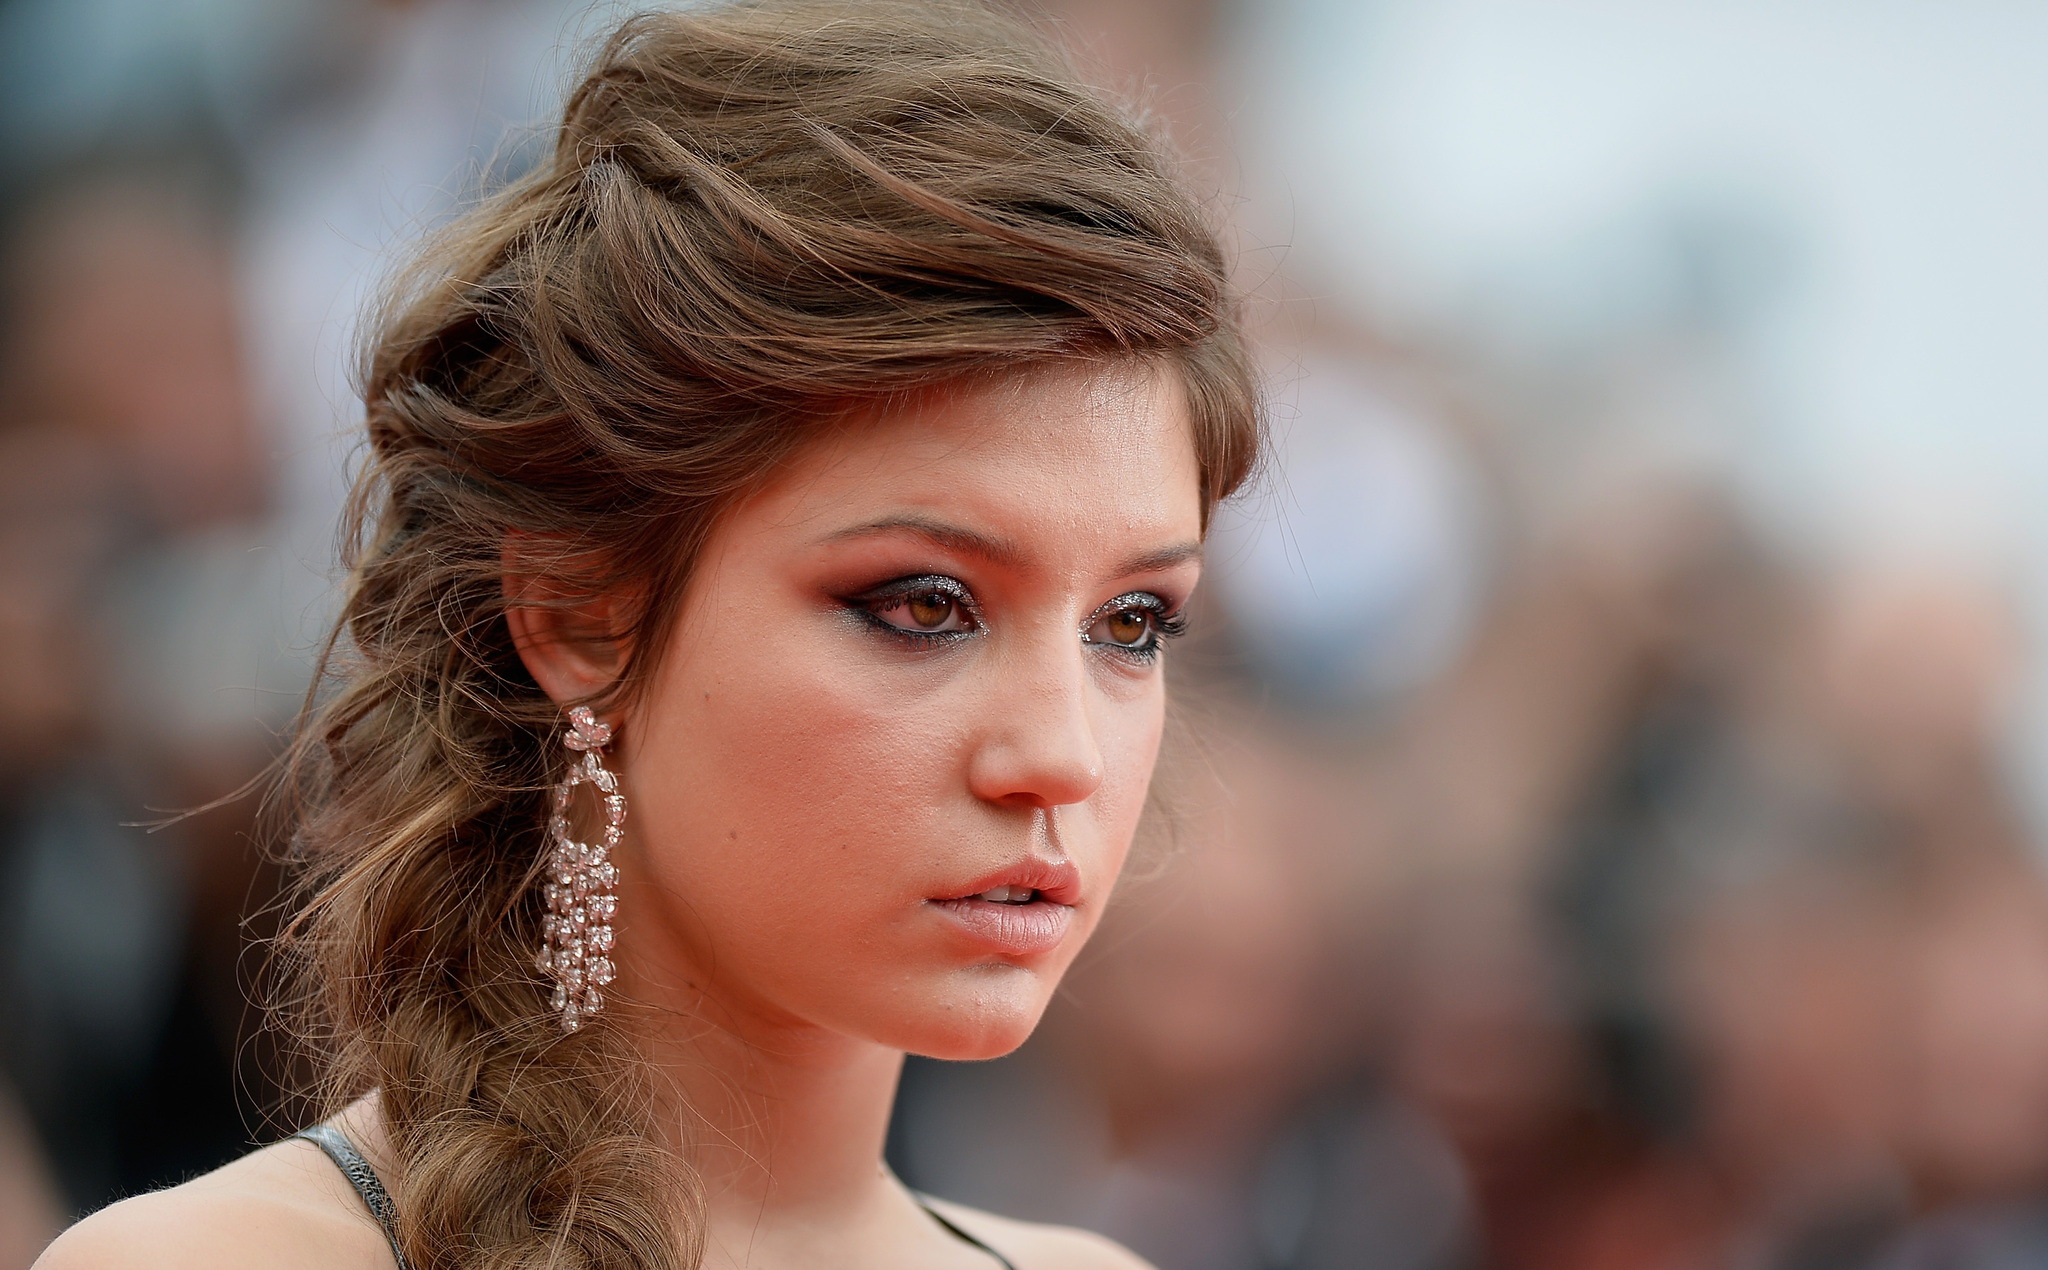 Adèle Exarchopoulos at event of Monako princese (2014)